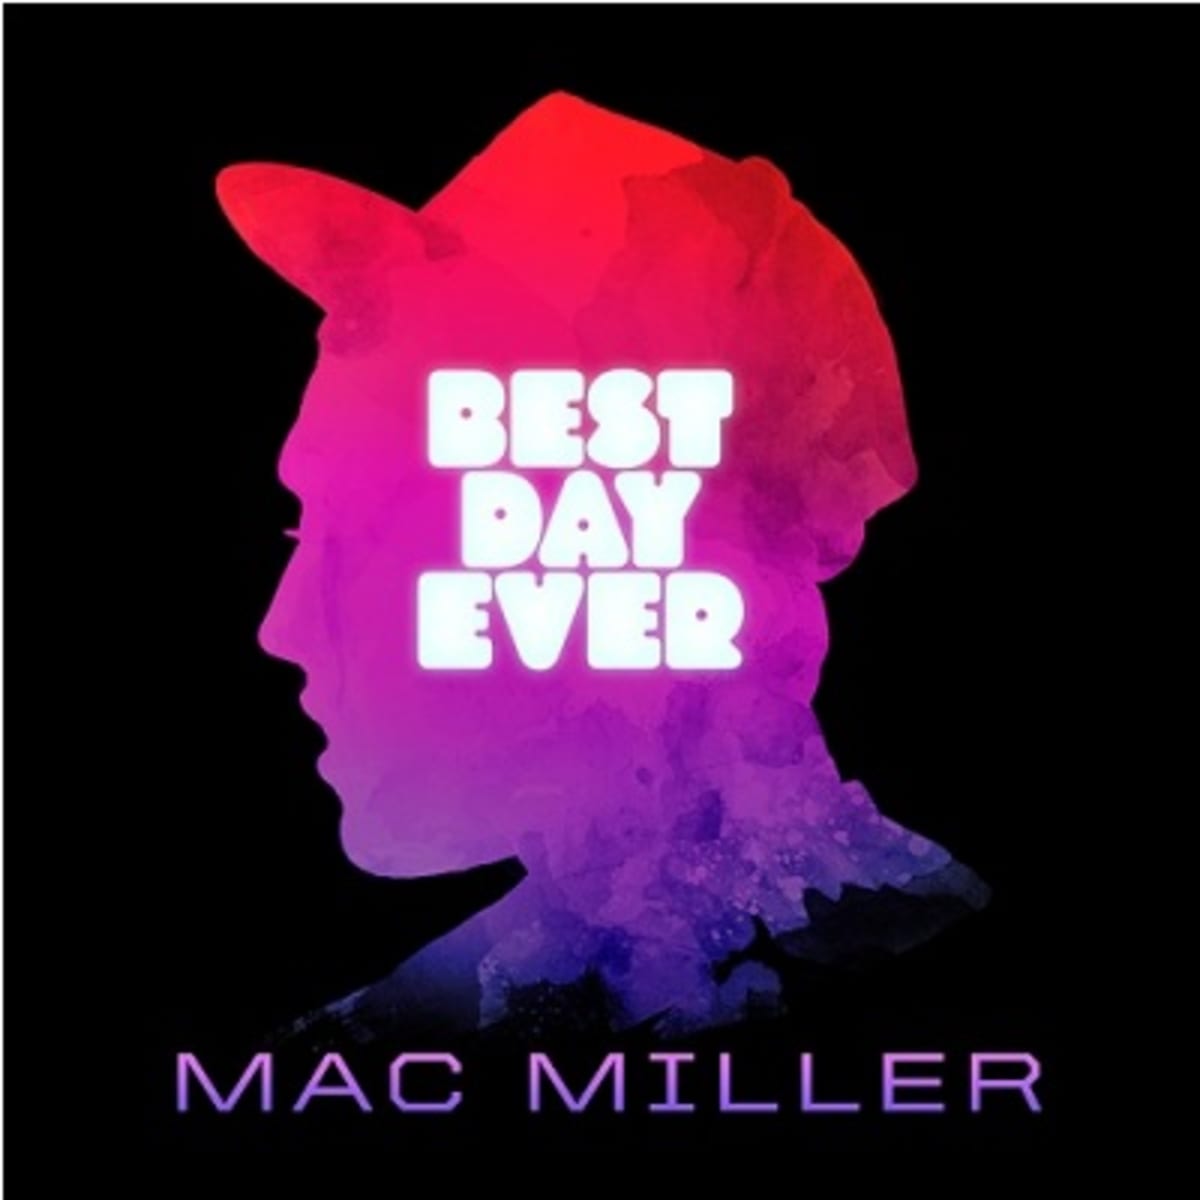 best day ever mac miller mp3 download free